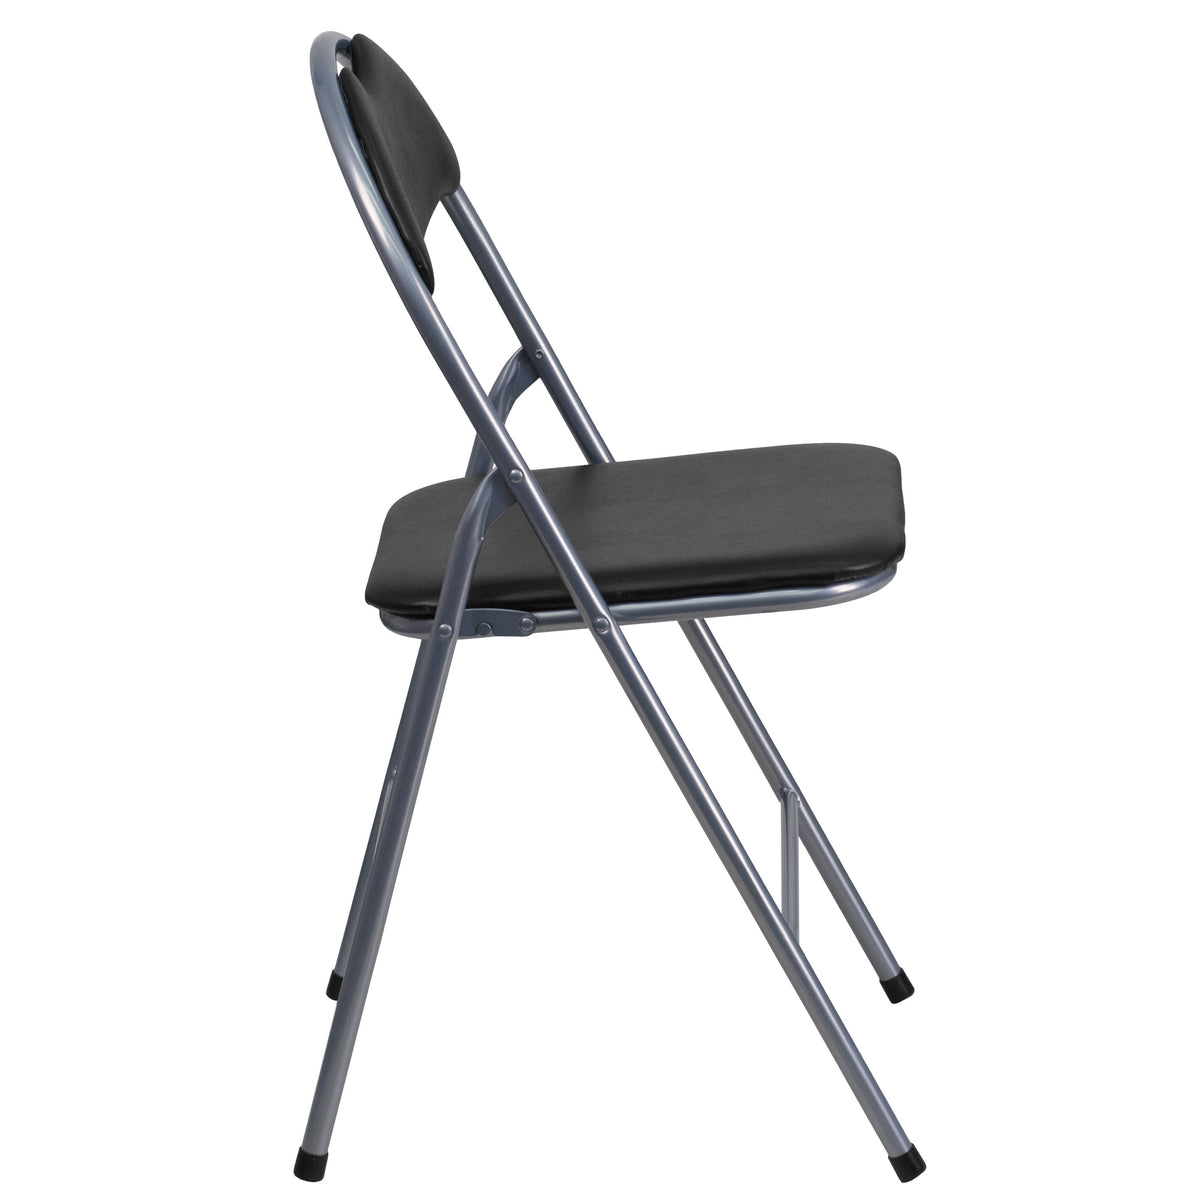 300 lb. Capacity Black Vinyl Metal Folding Chair with Carrying Handle